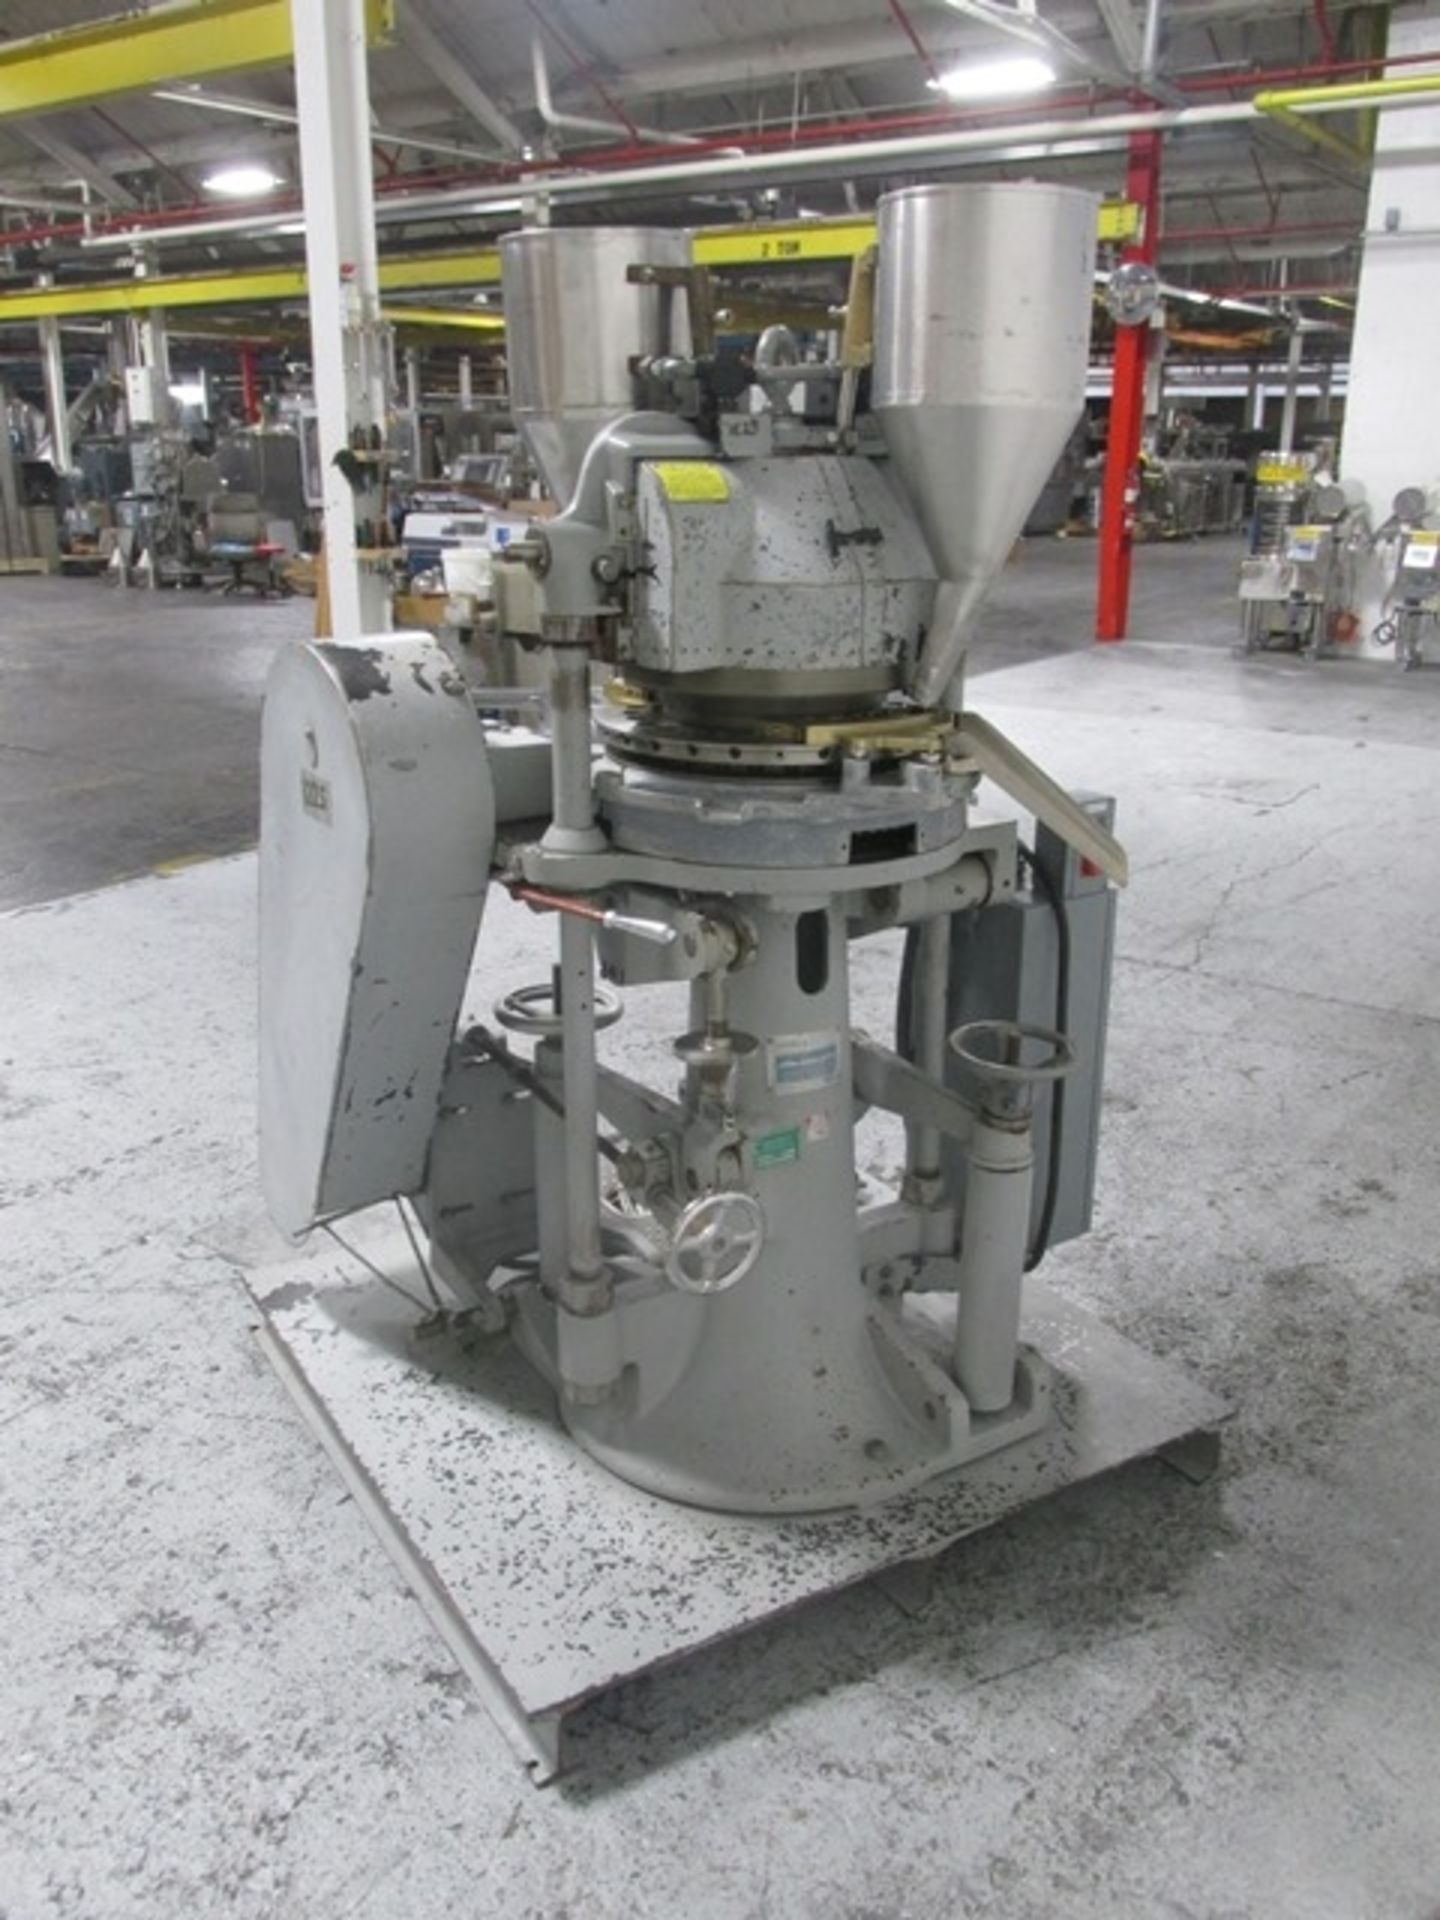 Stokes rotary tablet press. model 900-513-2, 27 station, double sided, keyed upper punch guides,